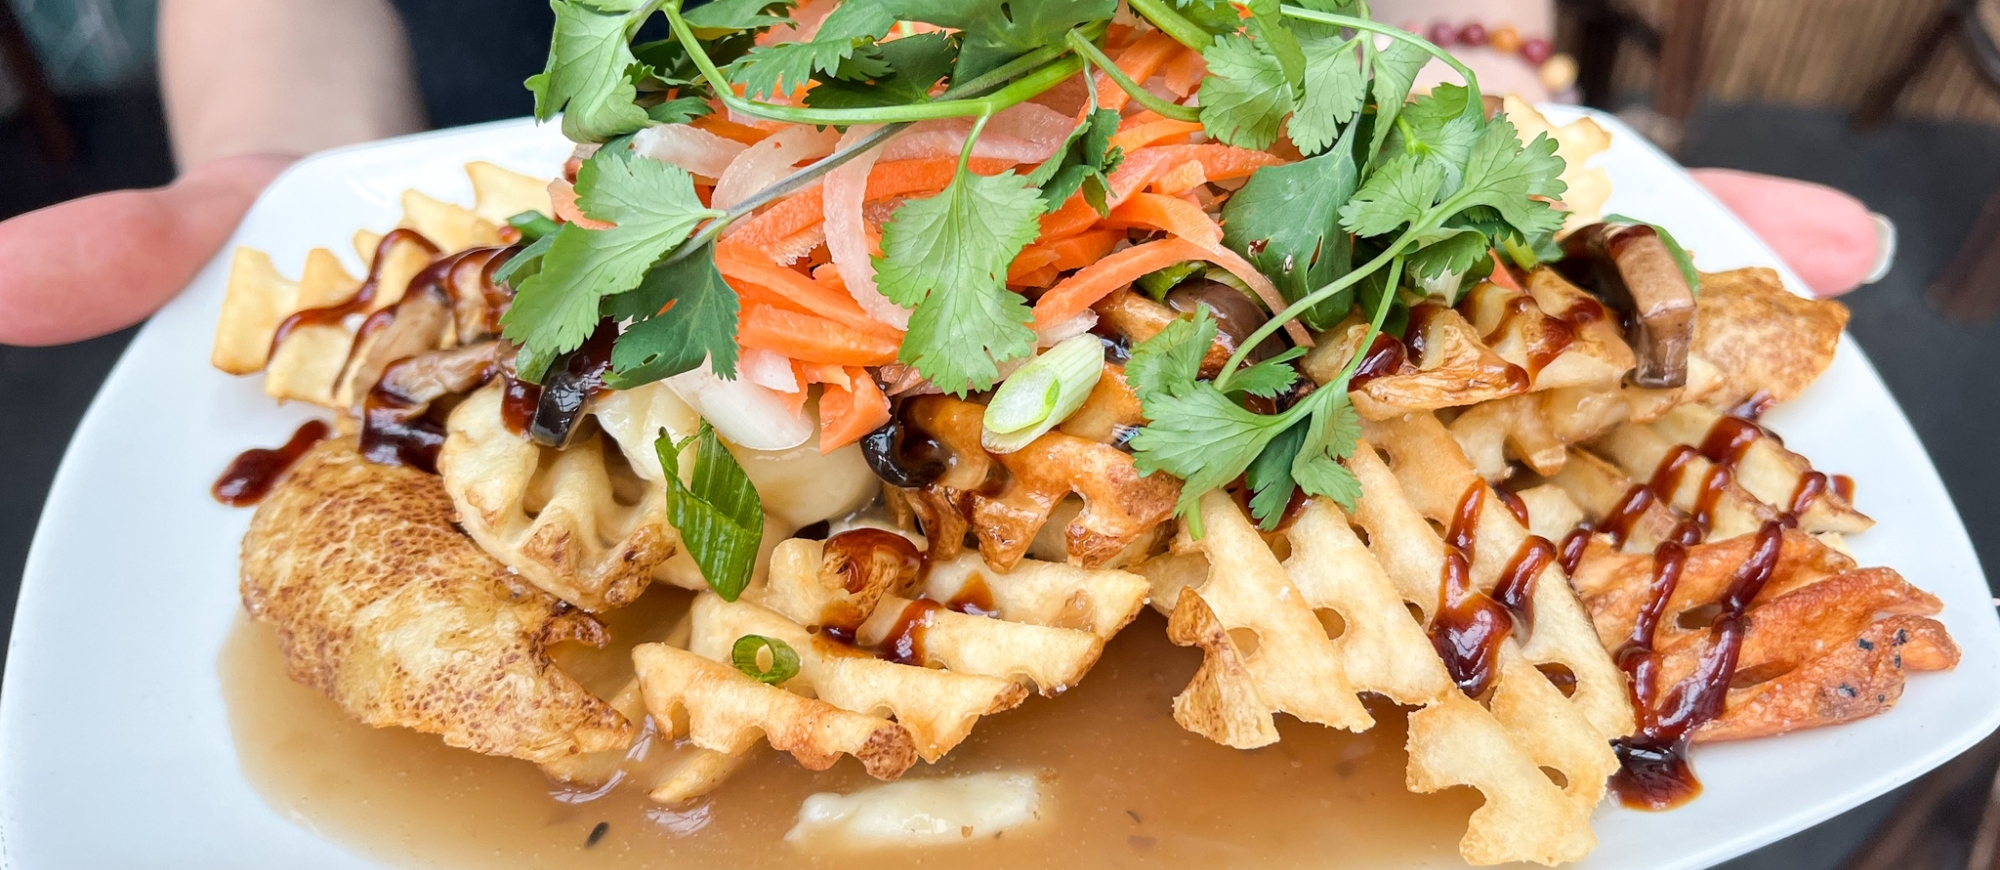 Waffle-fry pho-inspired poutine from Yum Son